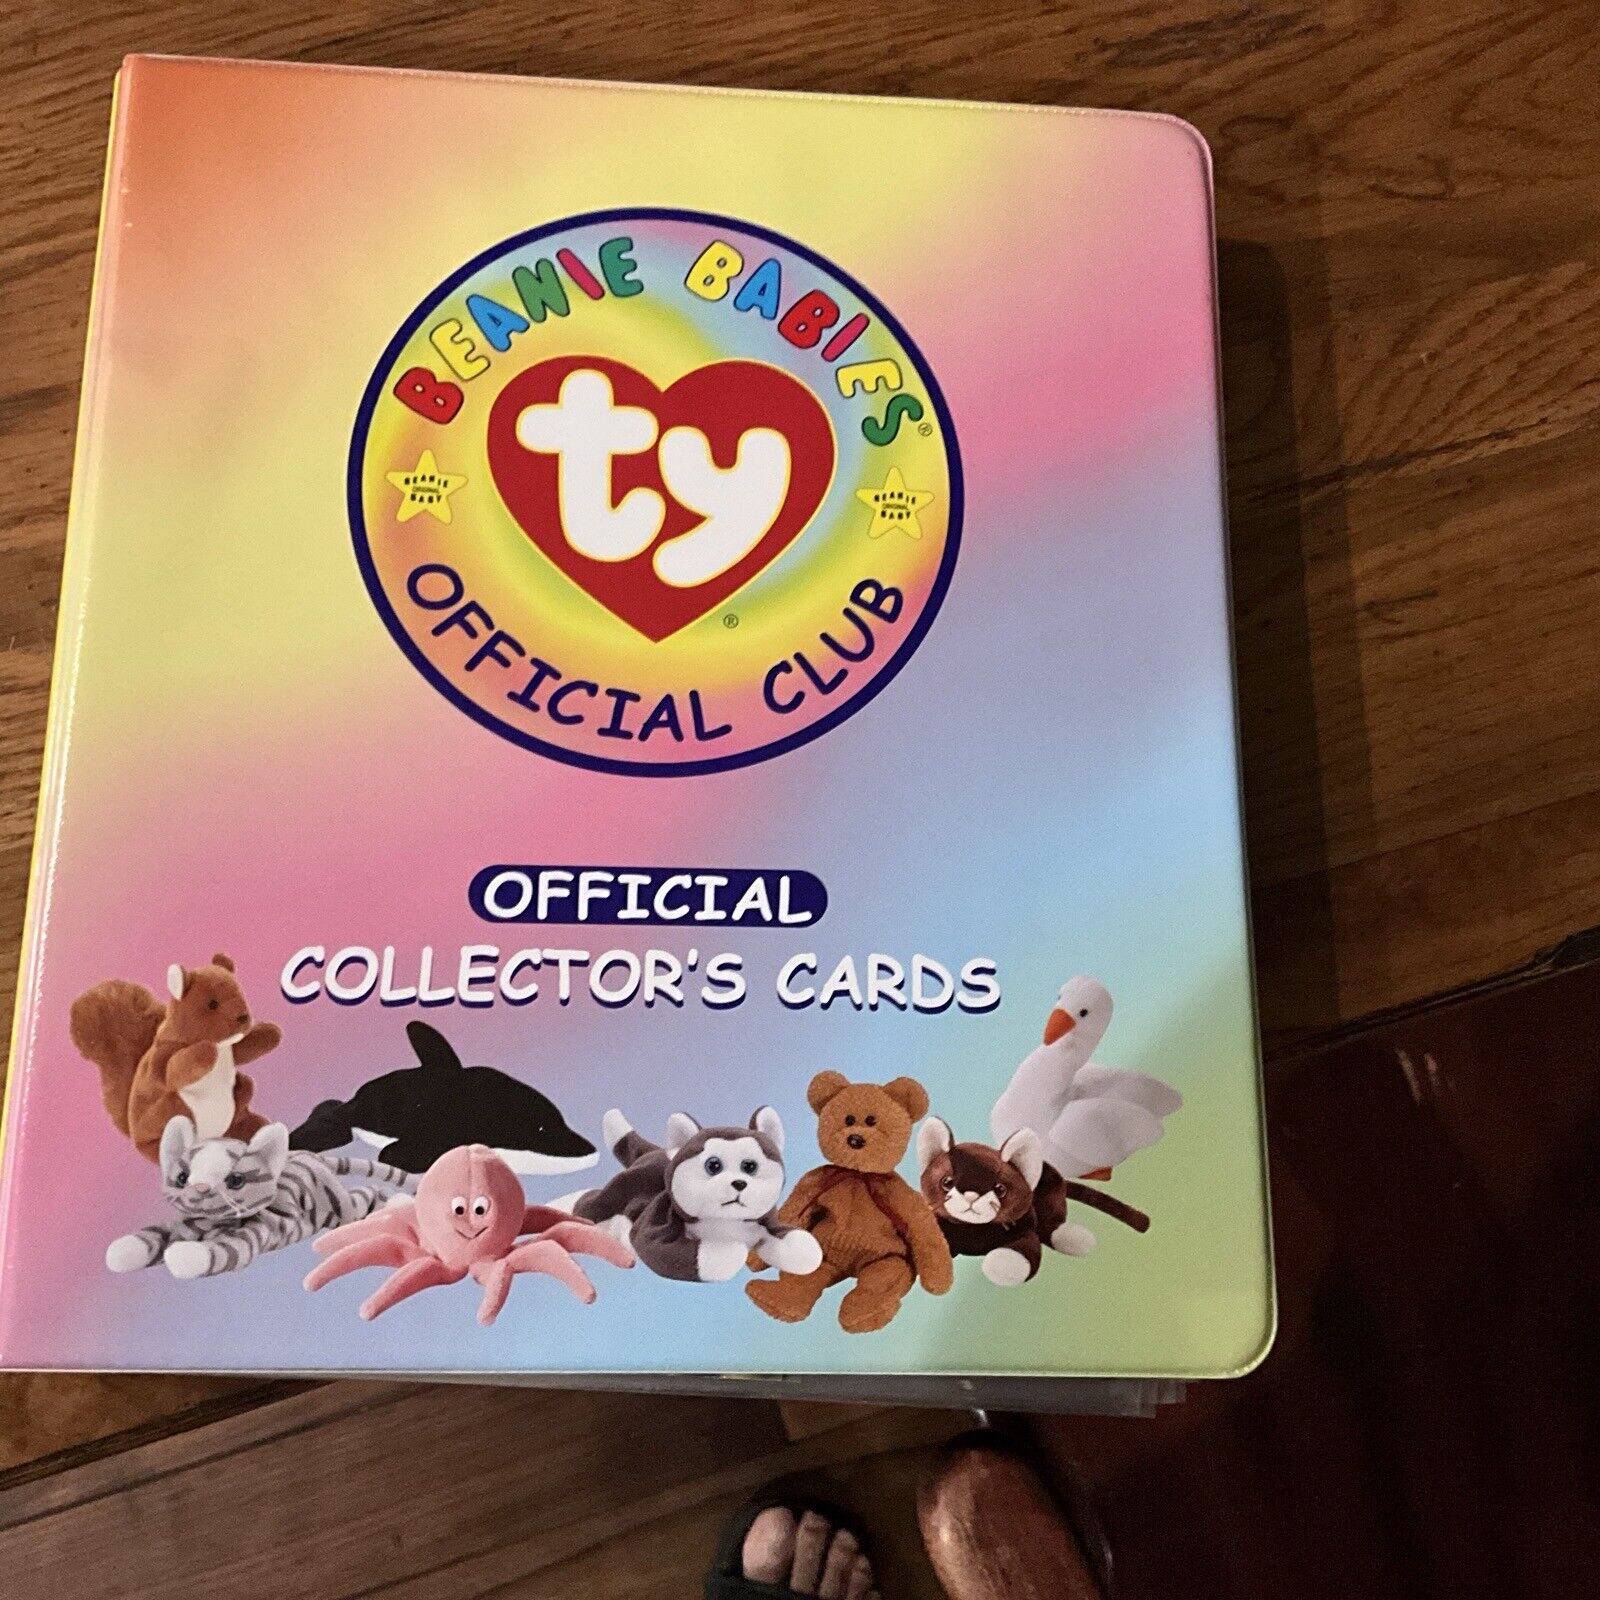 1998 Ty Beanie Babies Trading Cards Sets plus Binder And Inserts